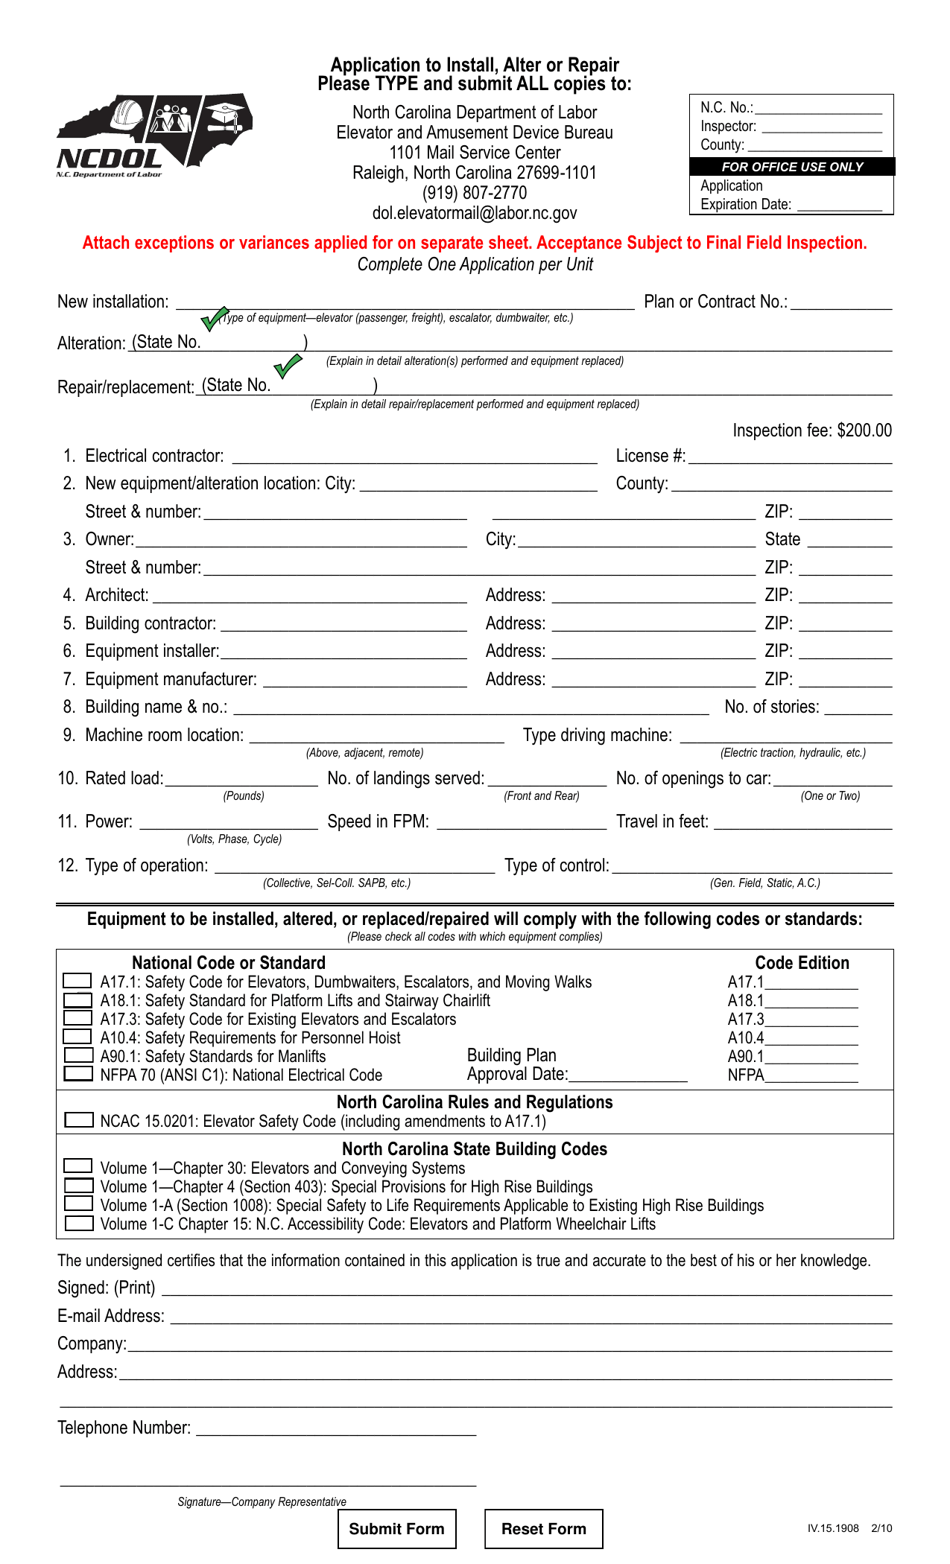 Application to Install, Alter or Repair - North Carolina, Page 1